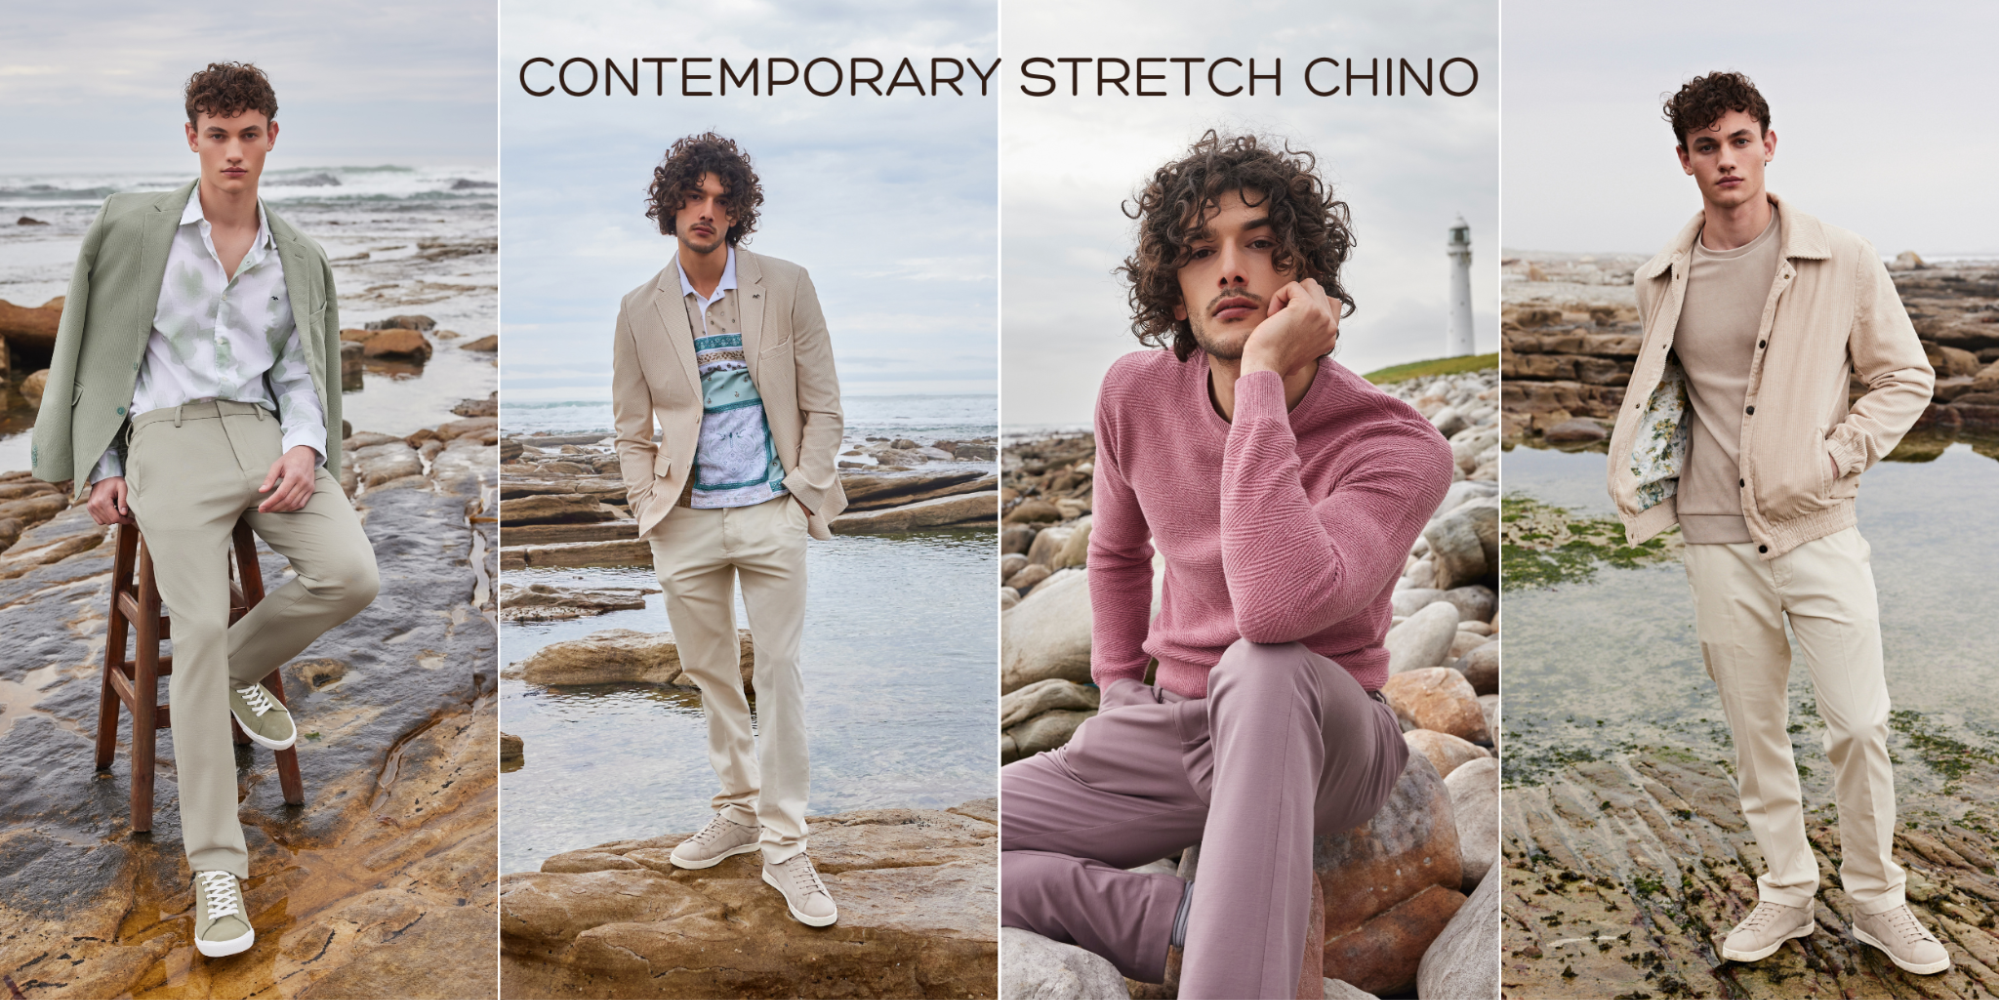 Contemporary Stretch Chino by Mufti